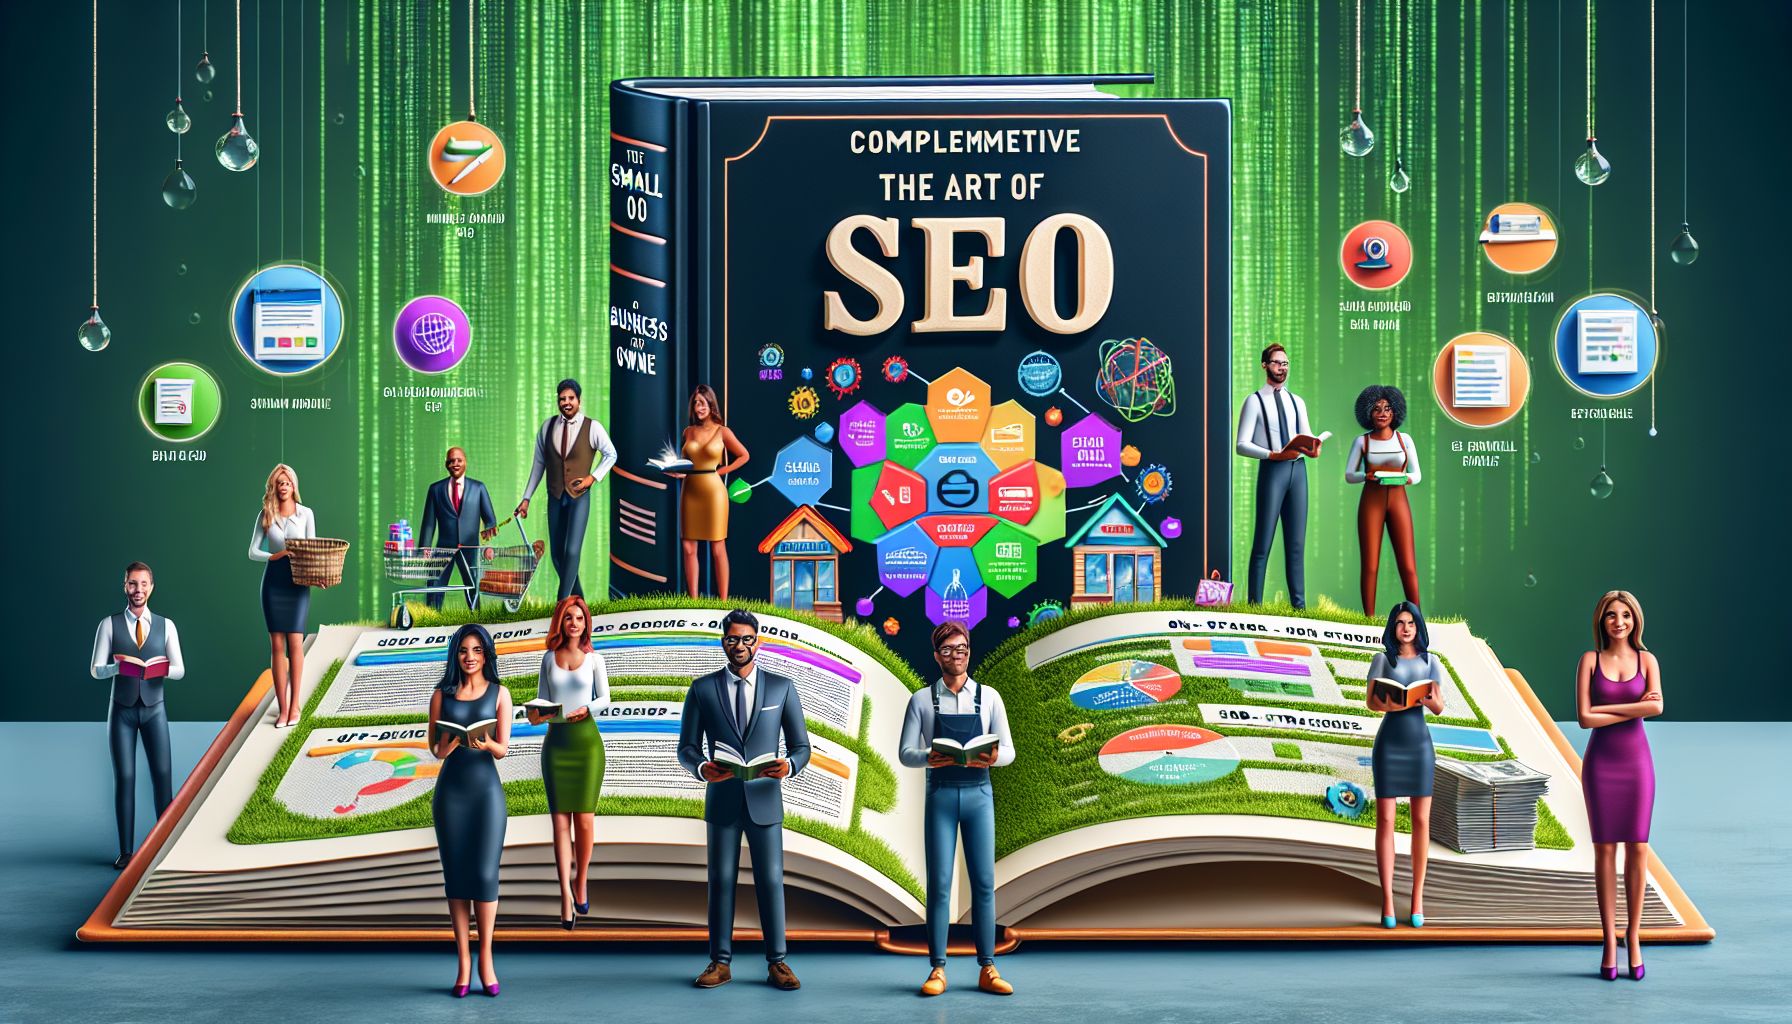 The Art of SEO for Small Business Owners